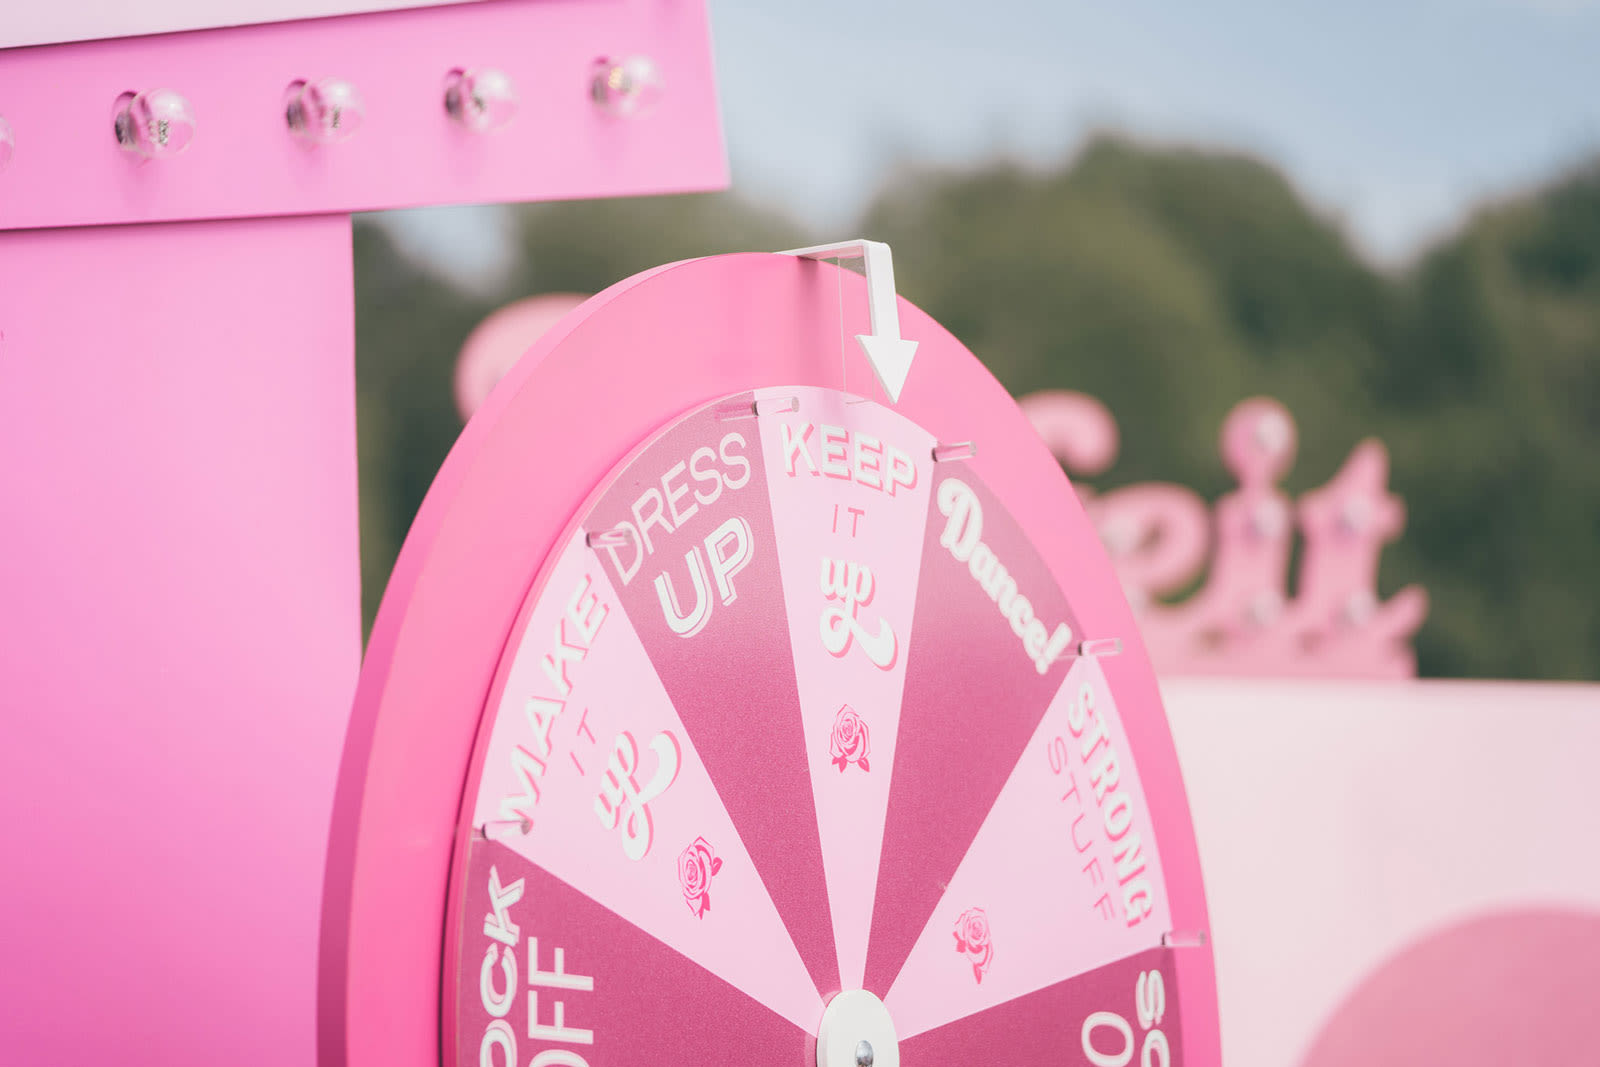 brand-activation-tequila-rose-b7s-wheel